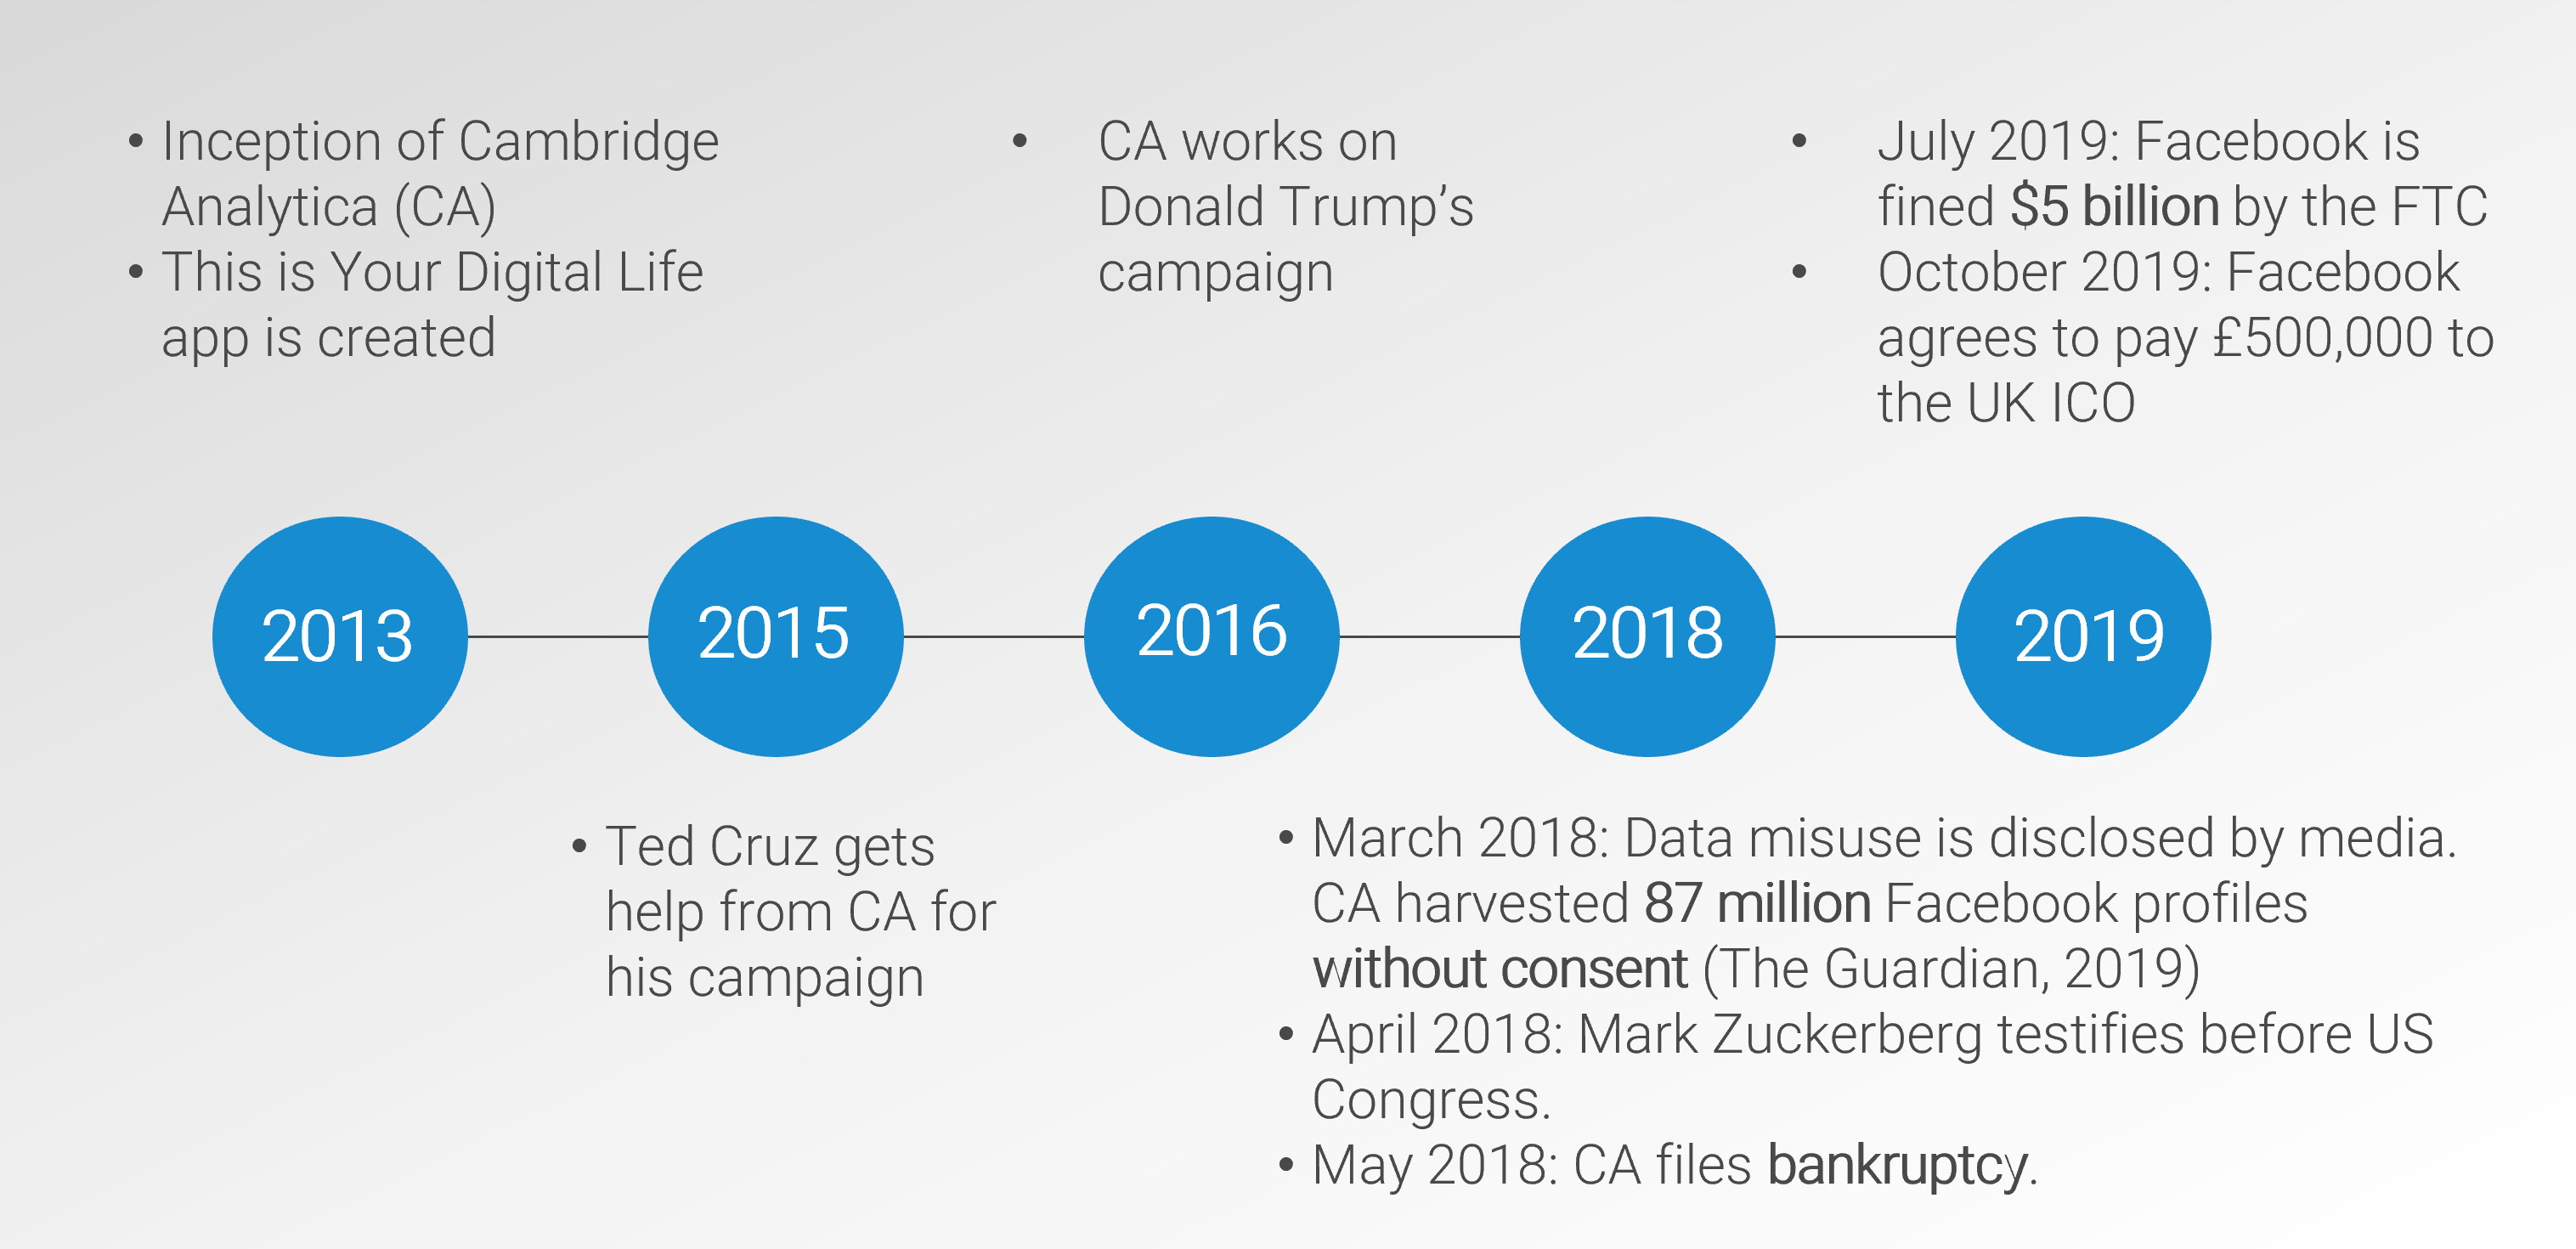 The image contains a timeline of events that were significant from 2013 to 2019 for Cambridge Analytica and Facebook.